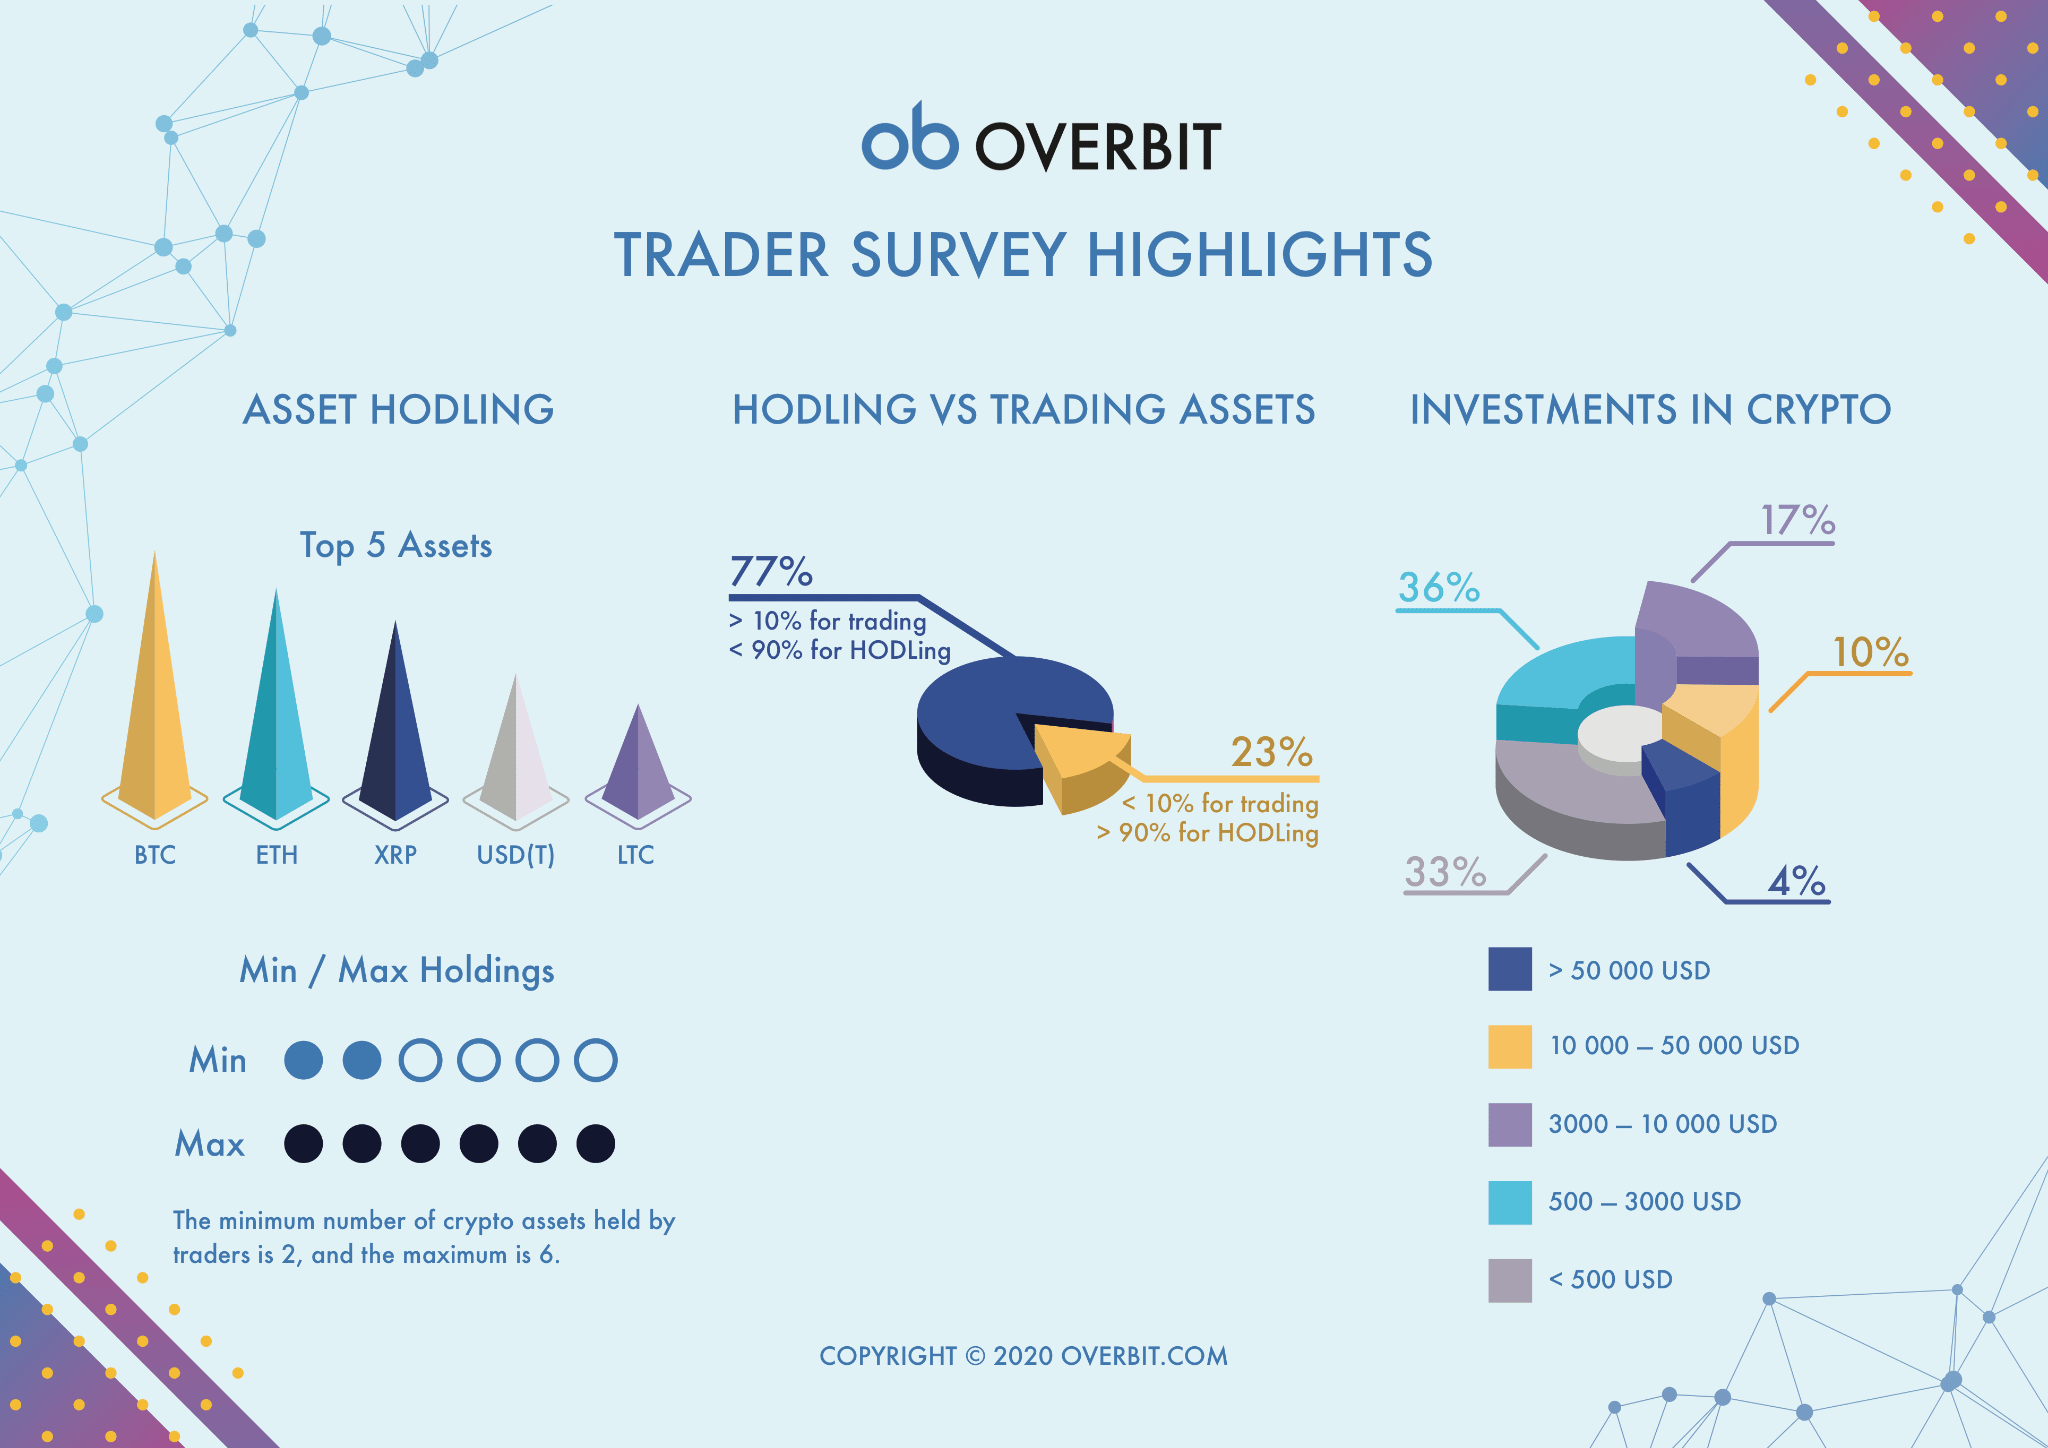 Overbit Launches 2021 Traders Survey with Crypto and Traditional Traders to Examine Key Influences and Patterns that Affect Trading Decisions.